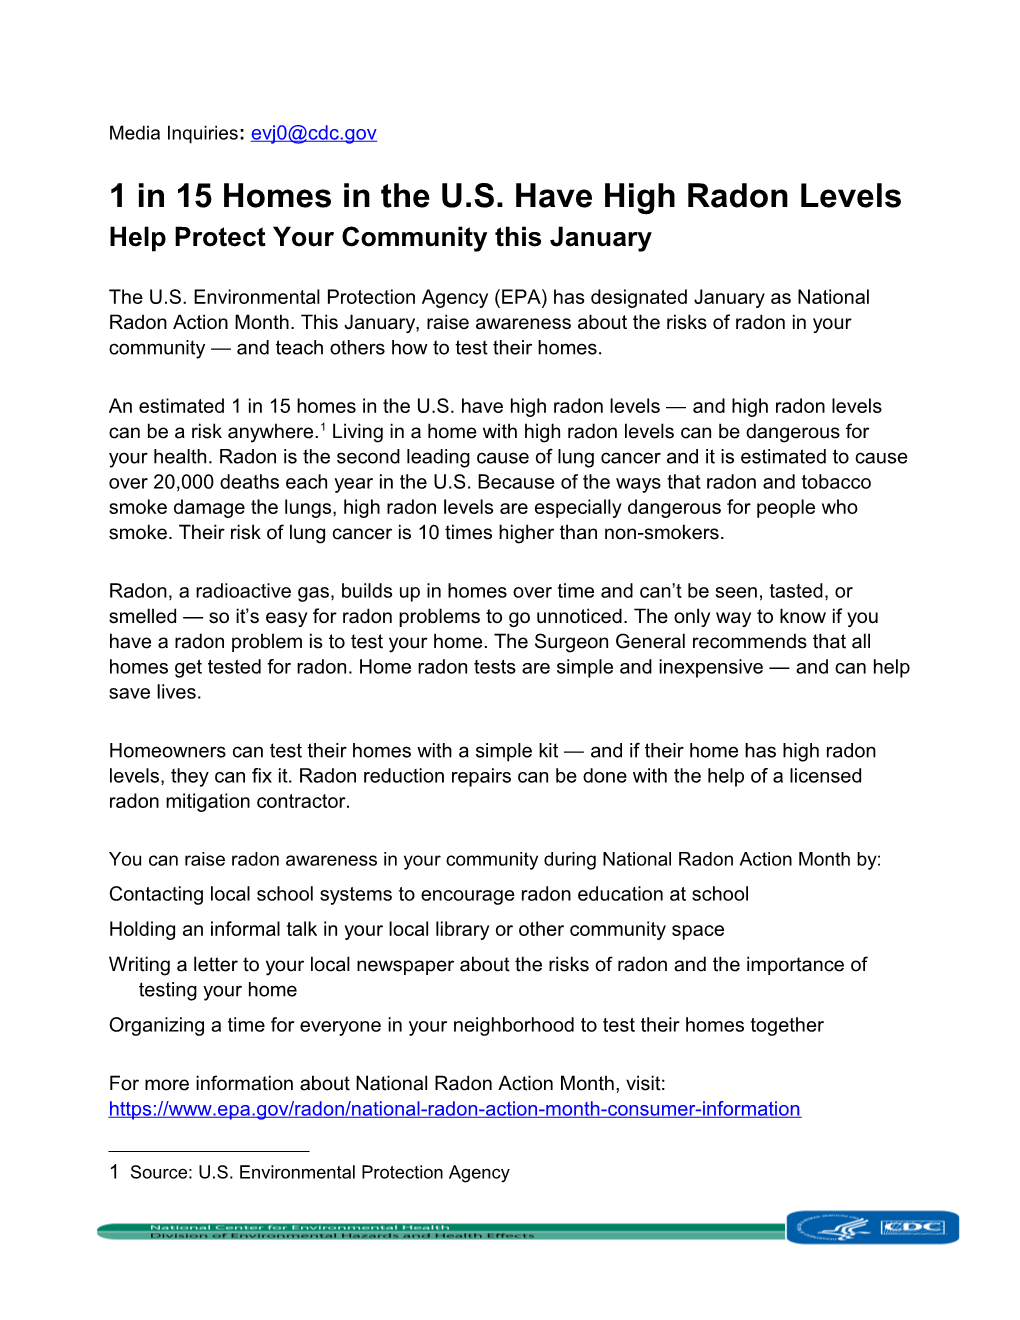 1 in 15 Homes in the United States Have Dangerously High Radon Levels. Help Protect Your